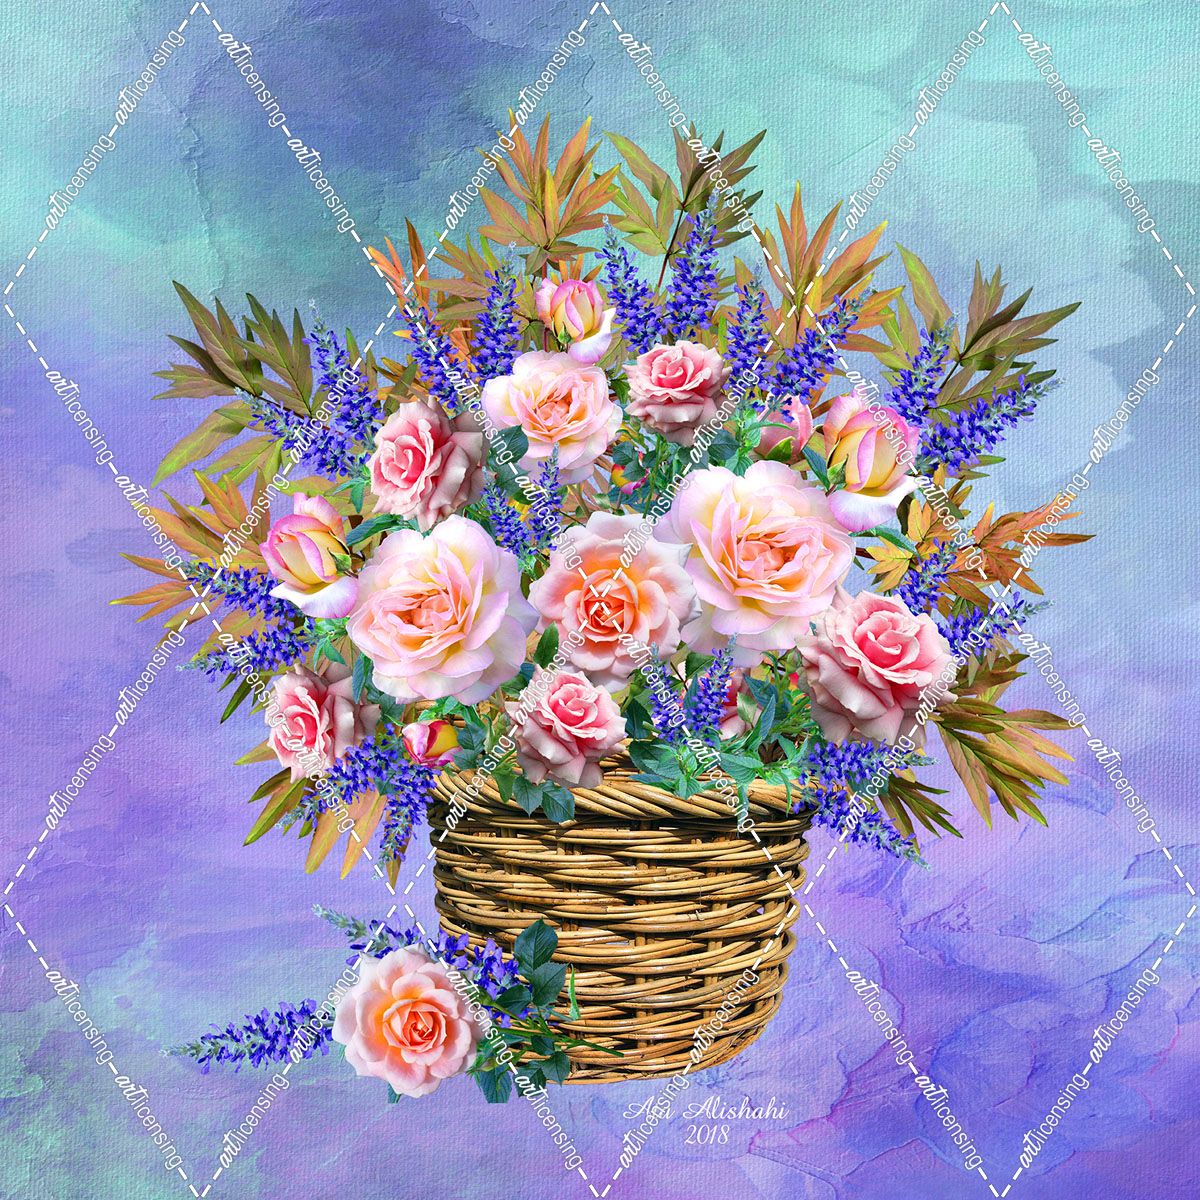 A Basket Of Flowers